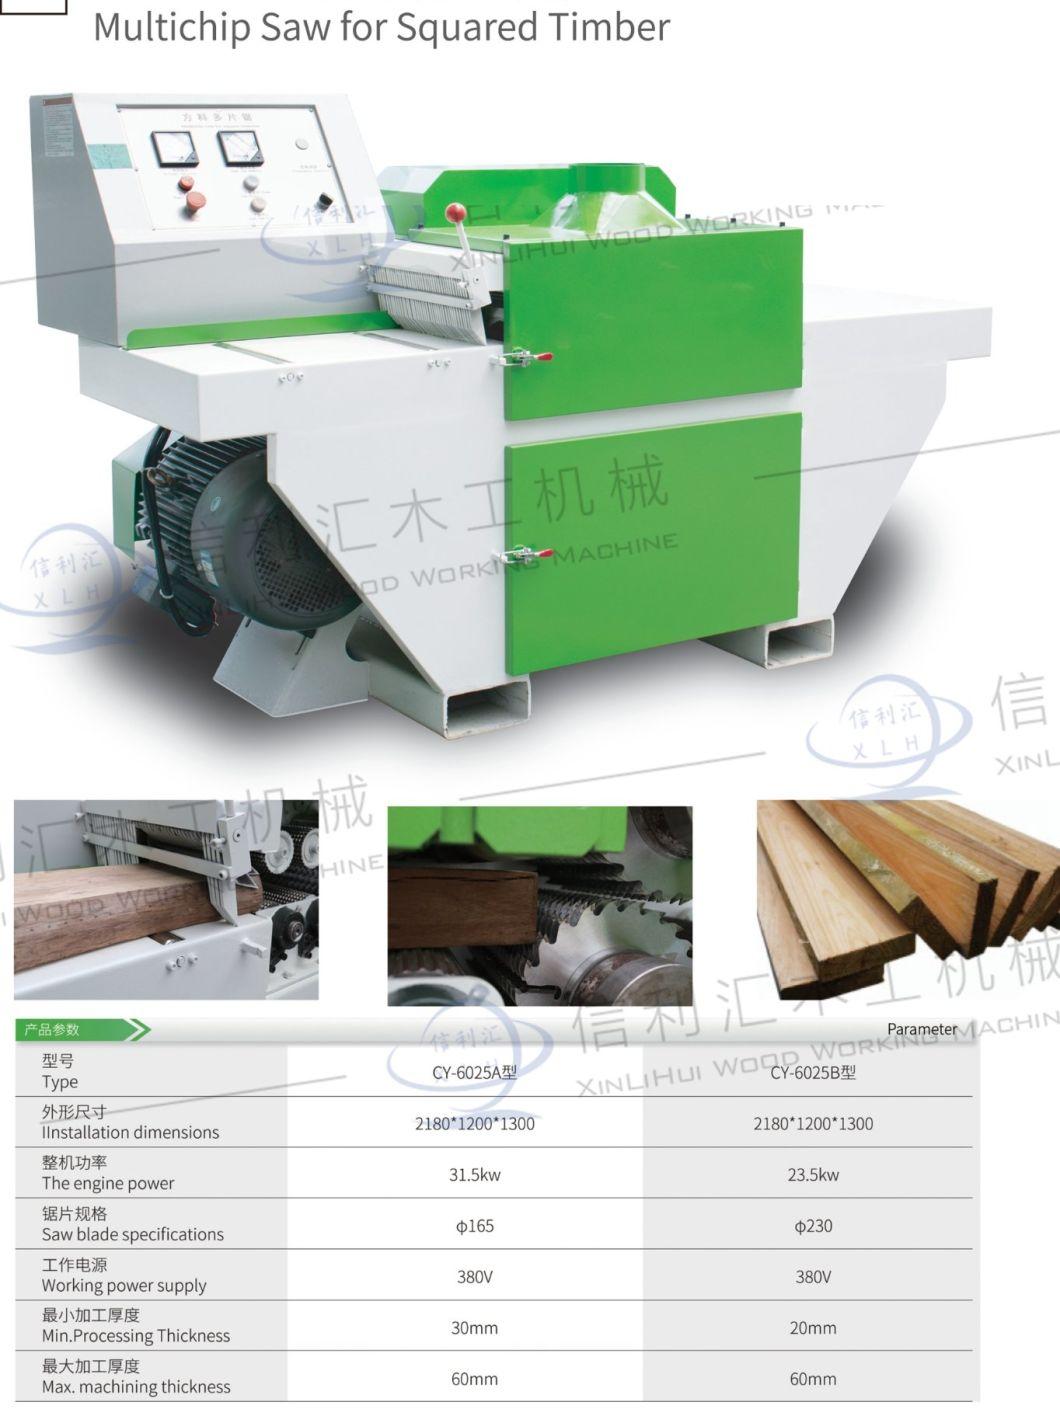 Multiple Use Woodworking Machines Saw Timber Cut off for Other Solid Wood Processing Enterprises Use Whole Sale